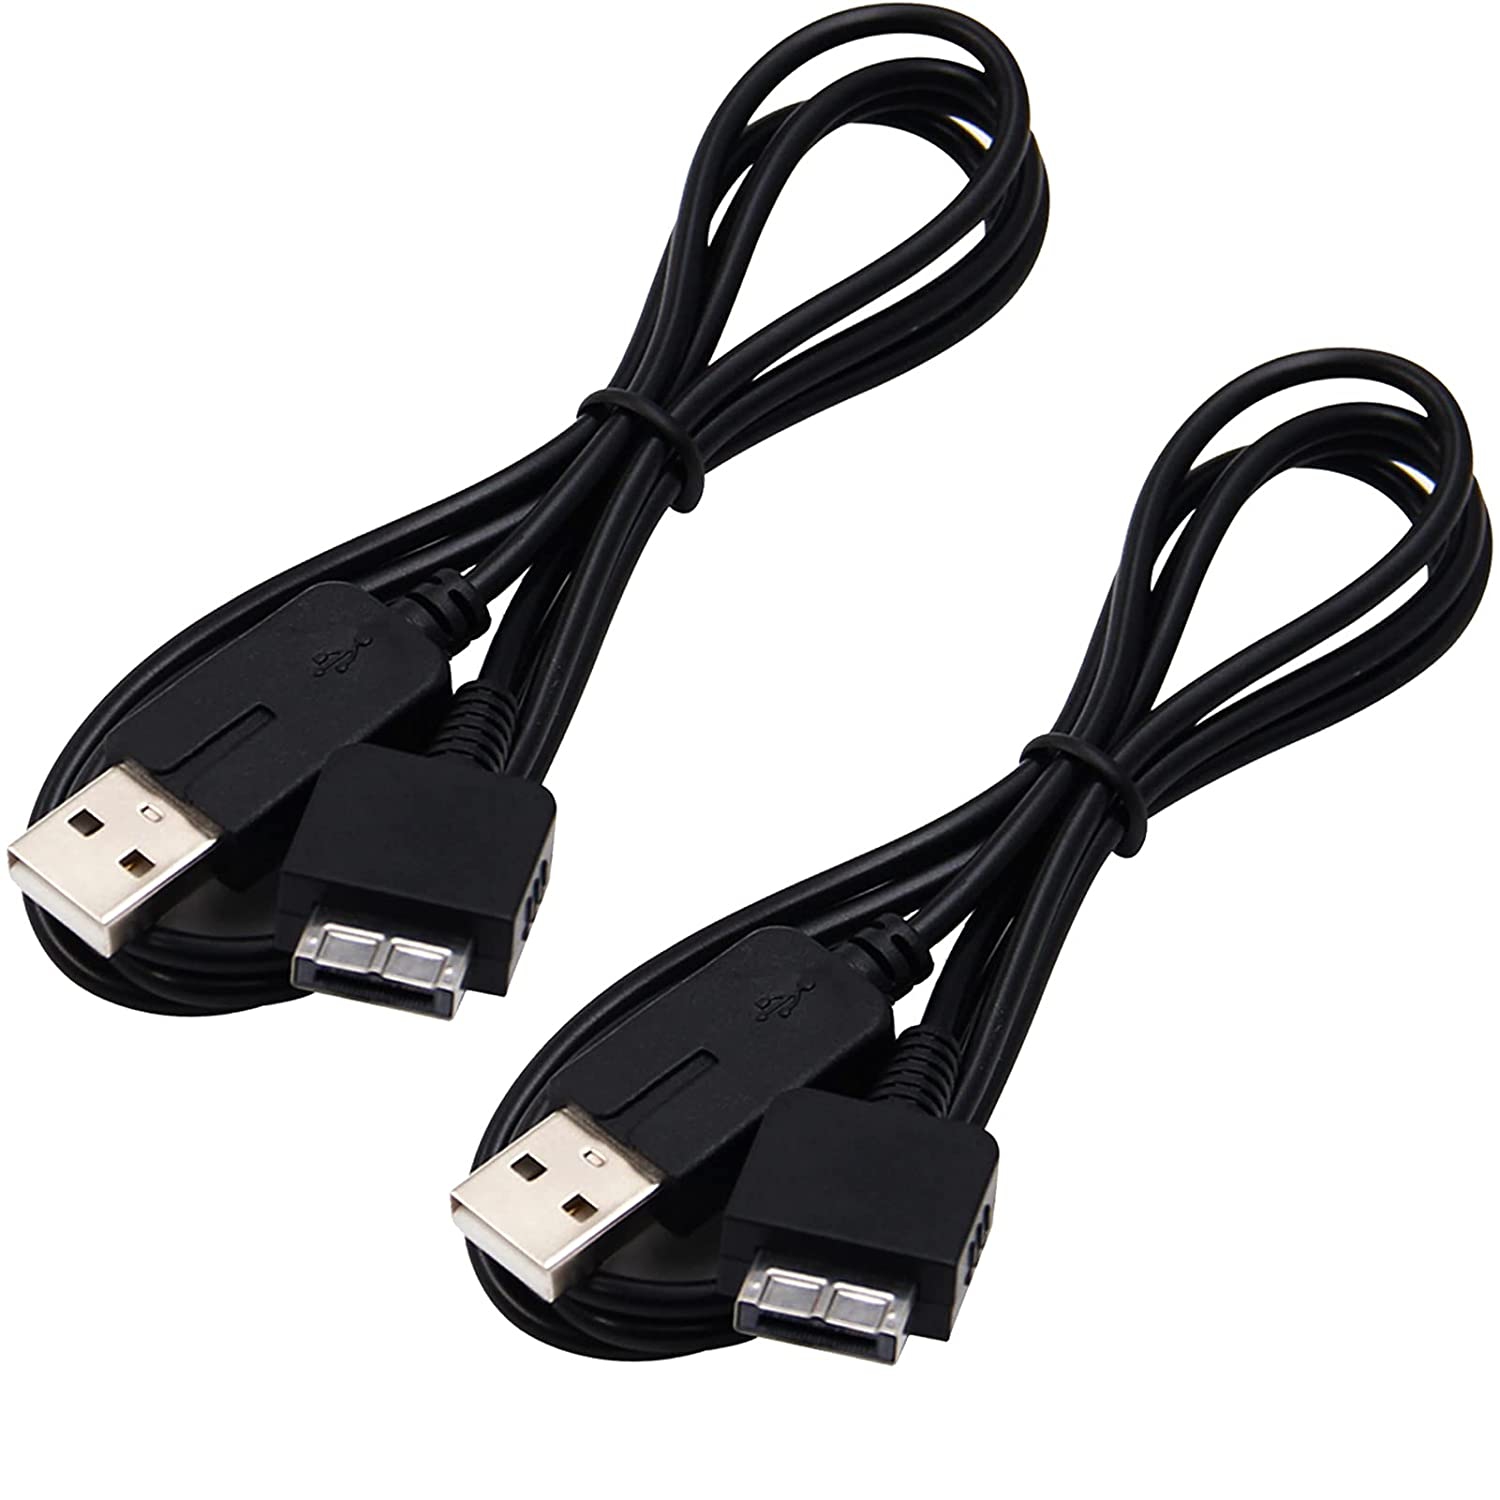 USB Charger Cable for PS Vita, 3.9FT 2 in 1 USB Data & Power Charger Cord Replacement for Playstation Vita 1000(2 Pack)